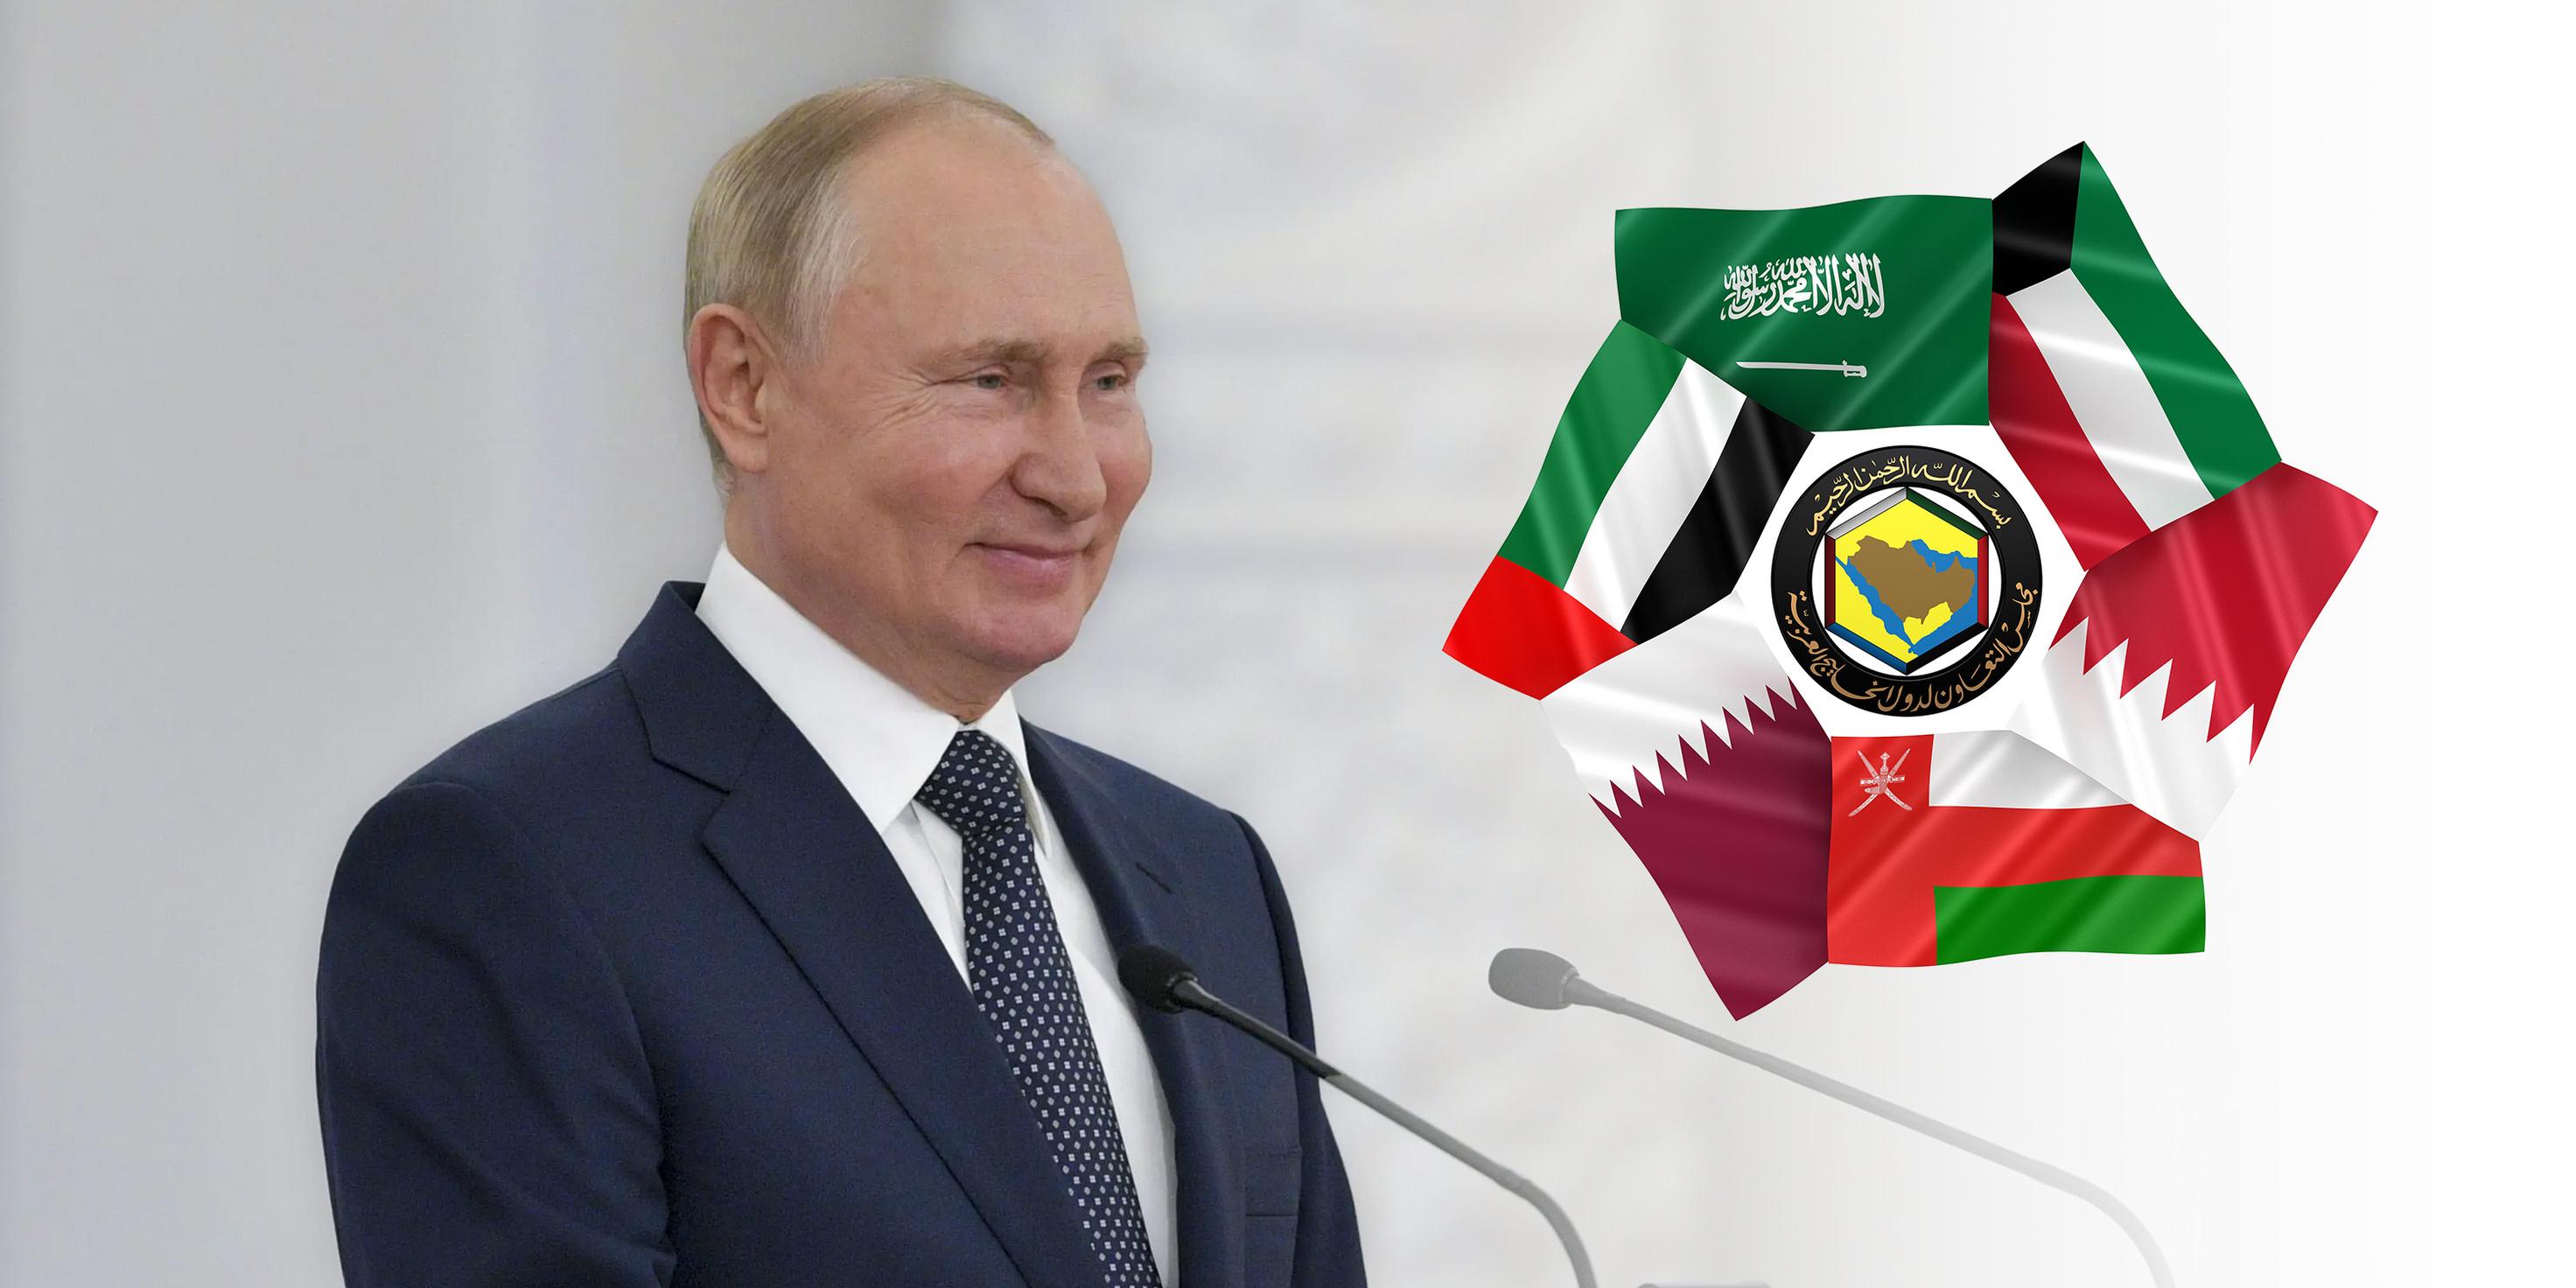 What Potential Collaboration Areas Exist between Russia and the GCC?